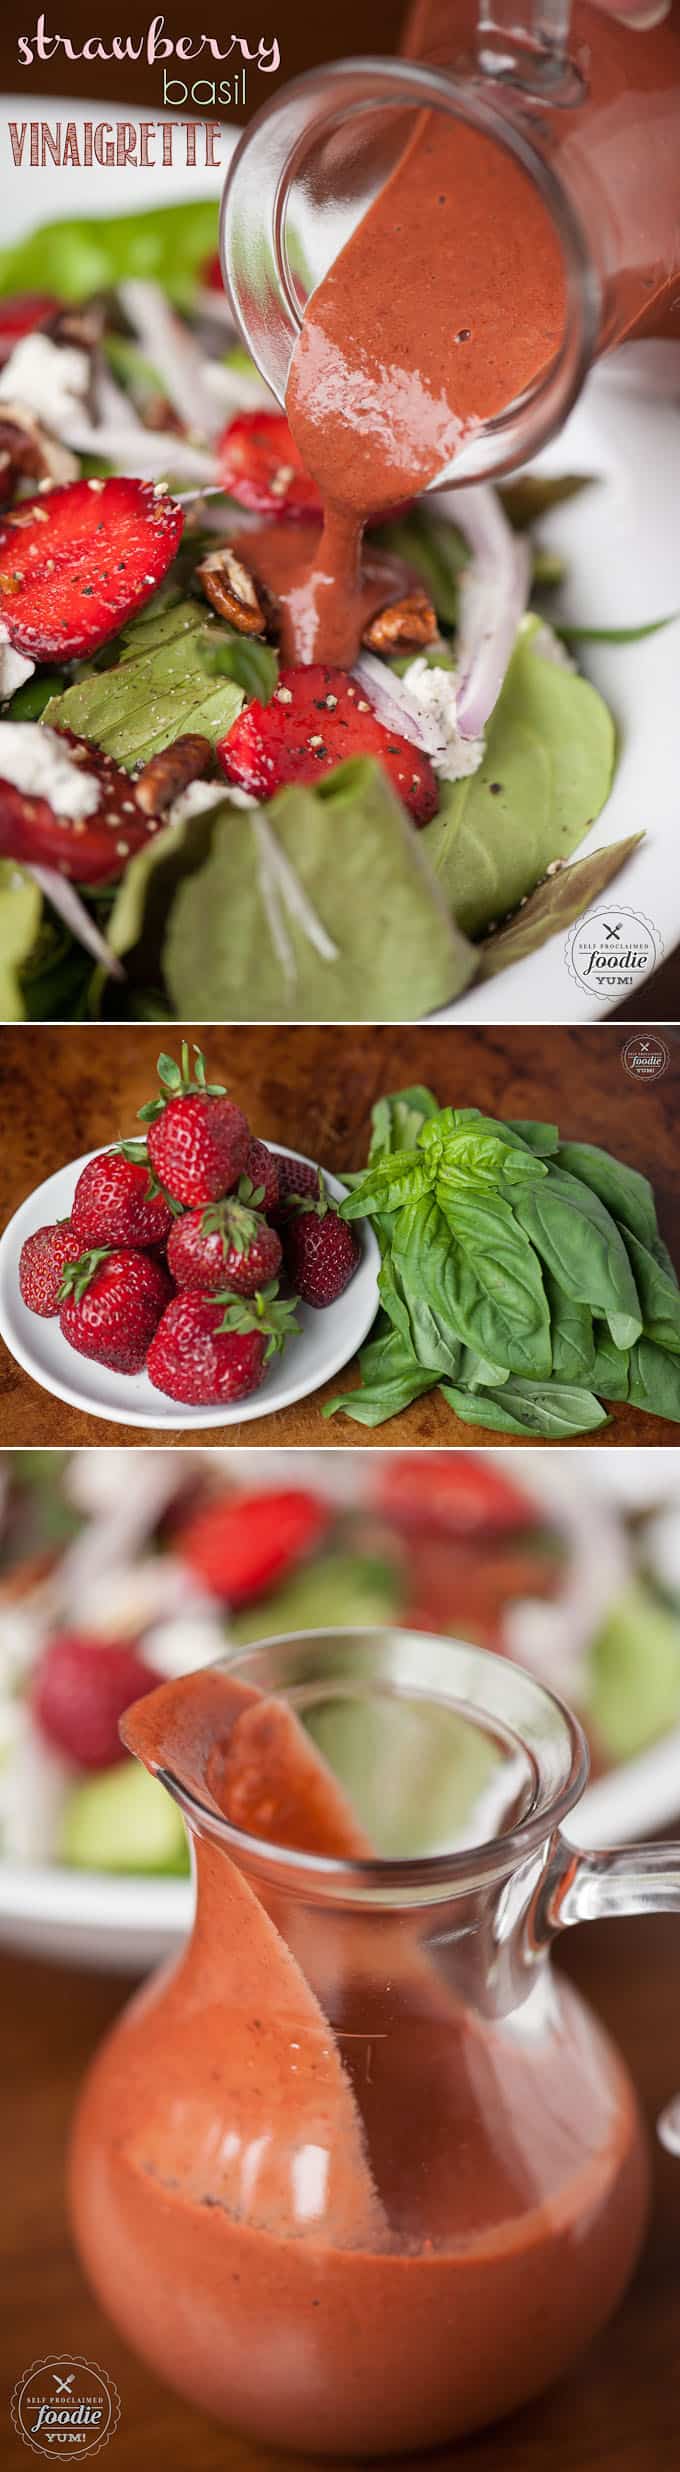 This Strawberry Basil Vinaigrette made with fresh strawberries and basil is a fresh, easy, and healthy dressing to top your summer green salads.